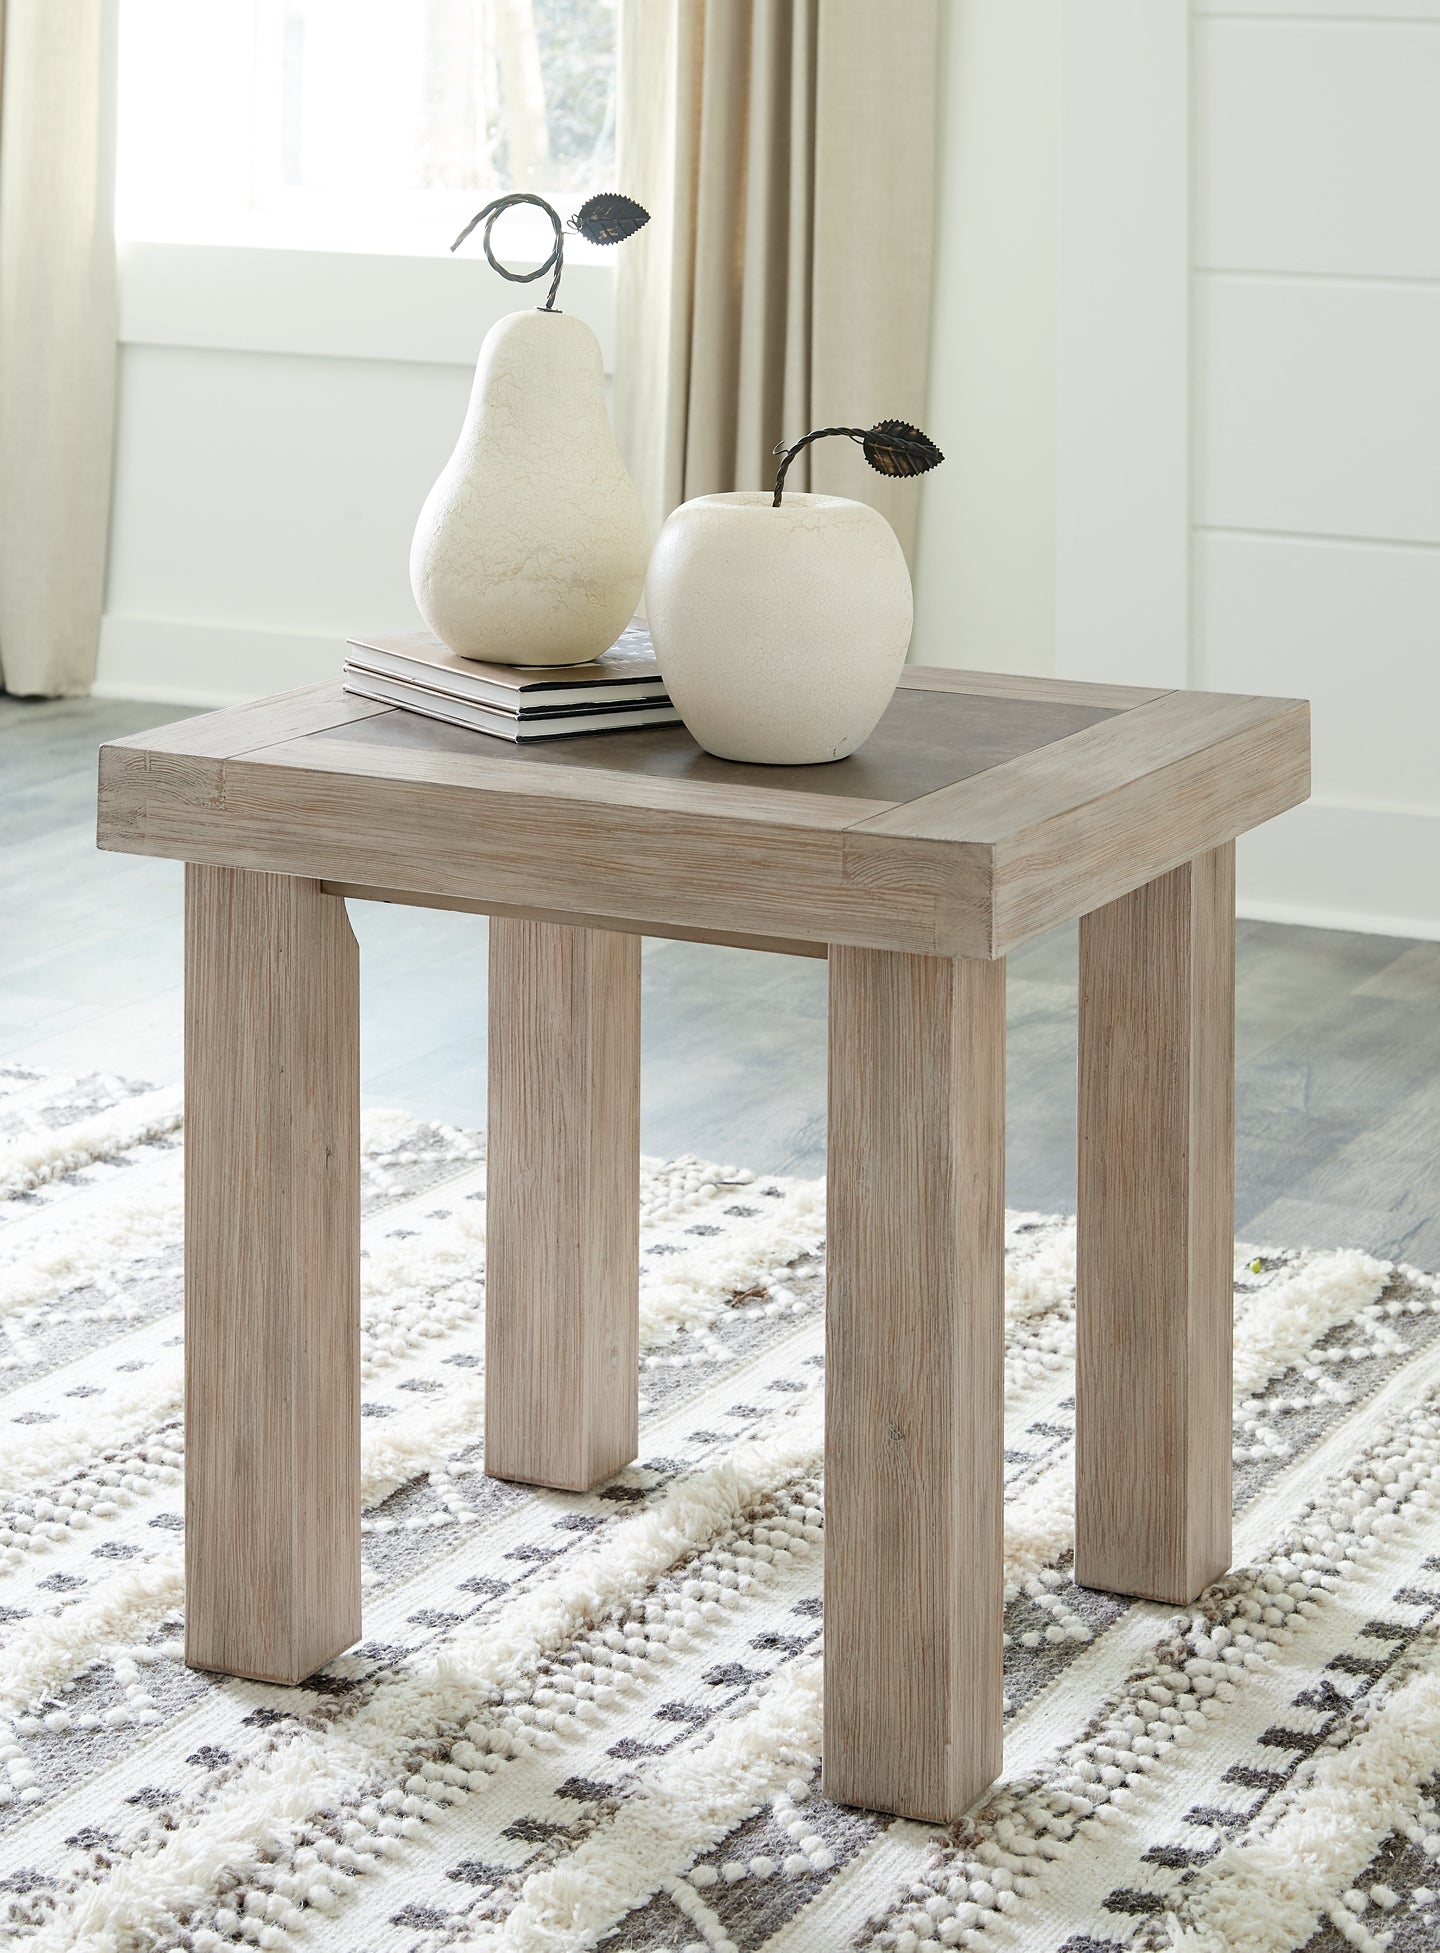 Hennington Coffee Table with 2 End Tables Wilson Furniture (OH)  in Bridgeport, Ohio. Serving Bridgeport, Yorkville, Bellaire, & Avondale